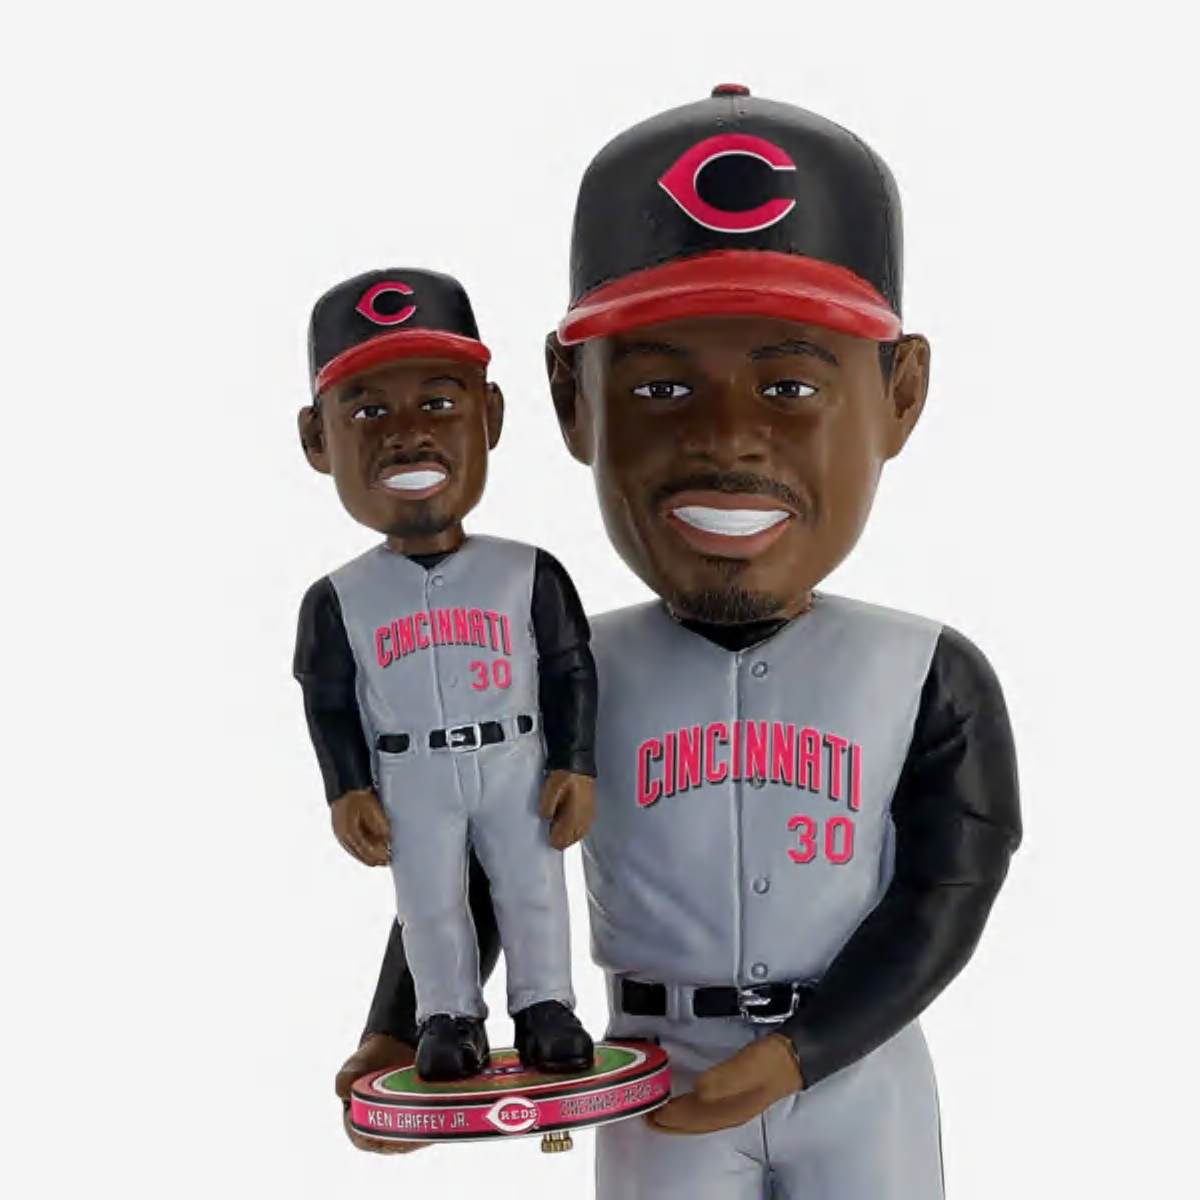 This Ken Griffey Jr. double bobblehead is awesome